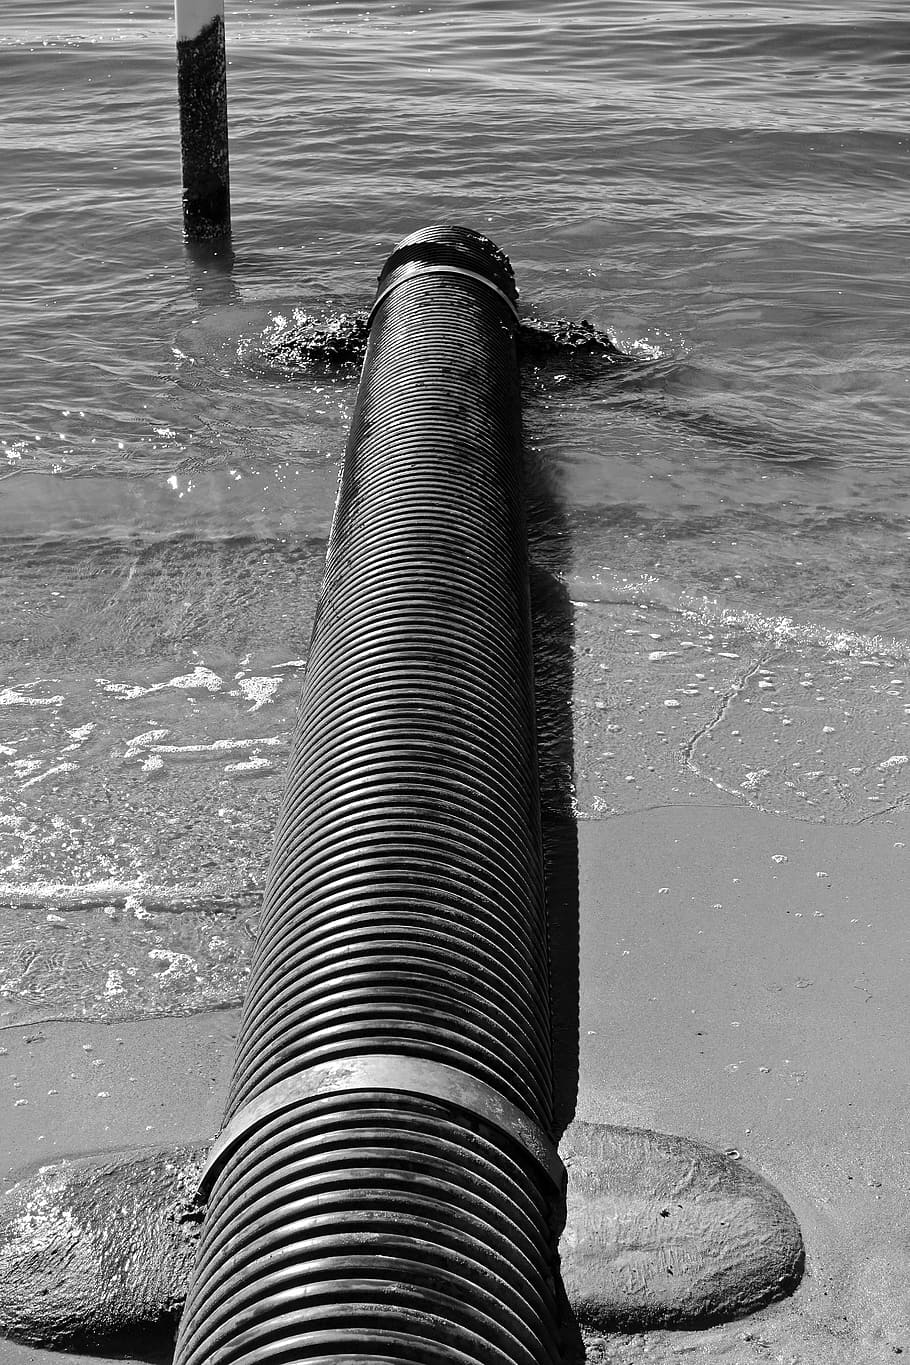 sewer, pipe, drain, outlet, pipeline, water, day, sea, nature, motion